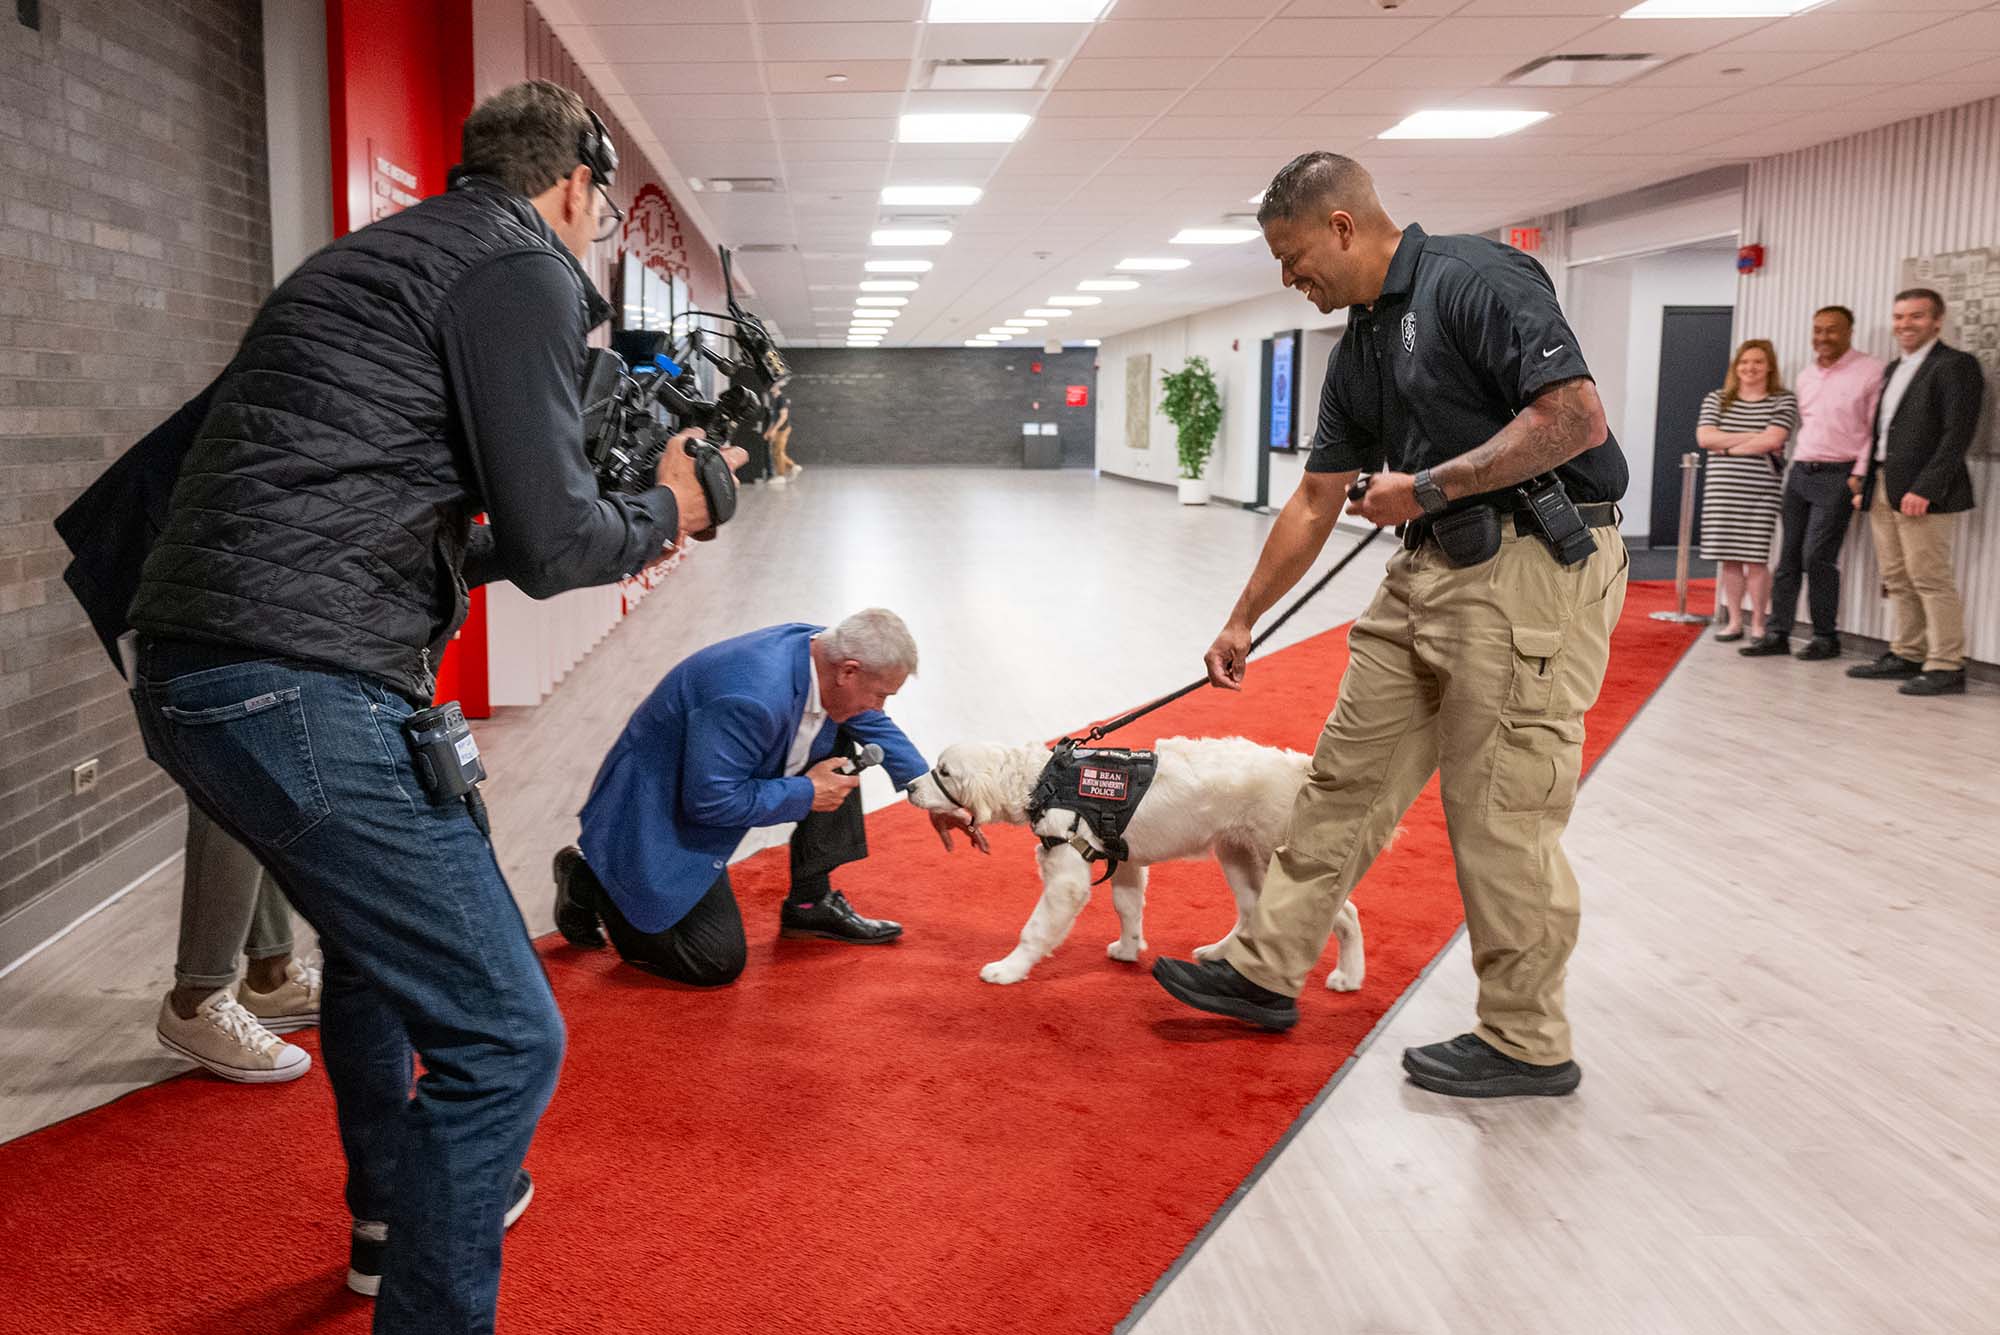 Photo: A picture of an interviewer and camera crew around a yellow labrador retriever on a red carpet